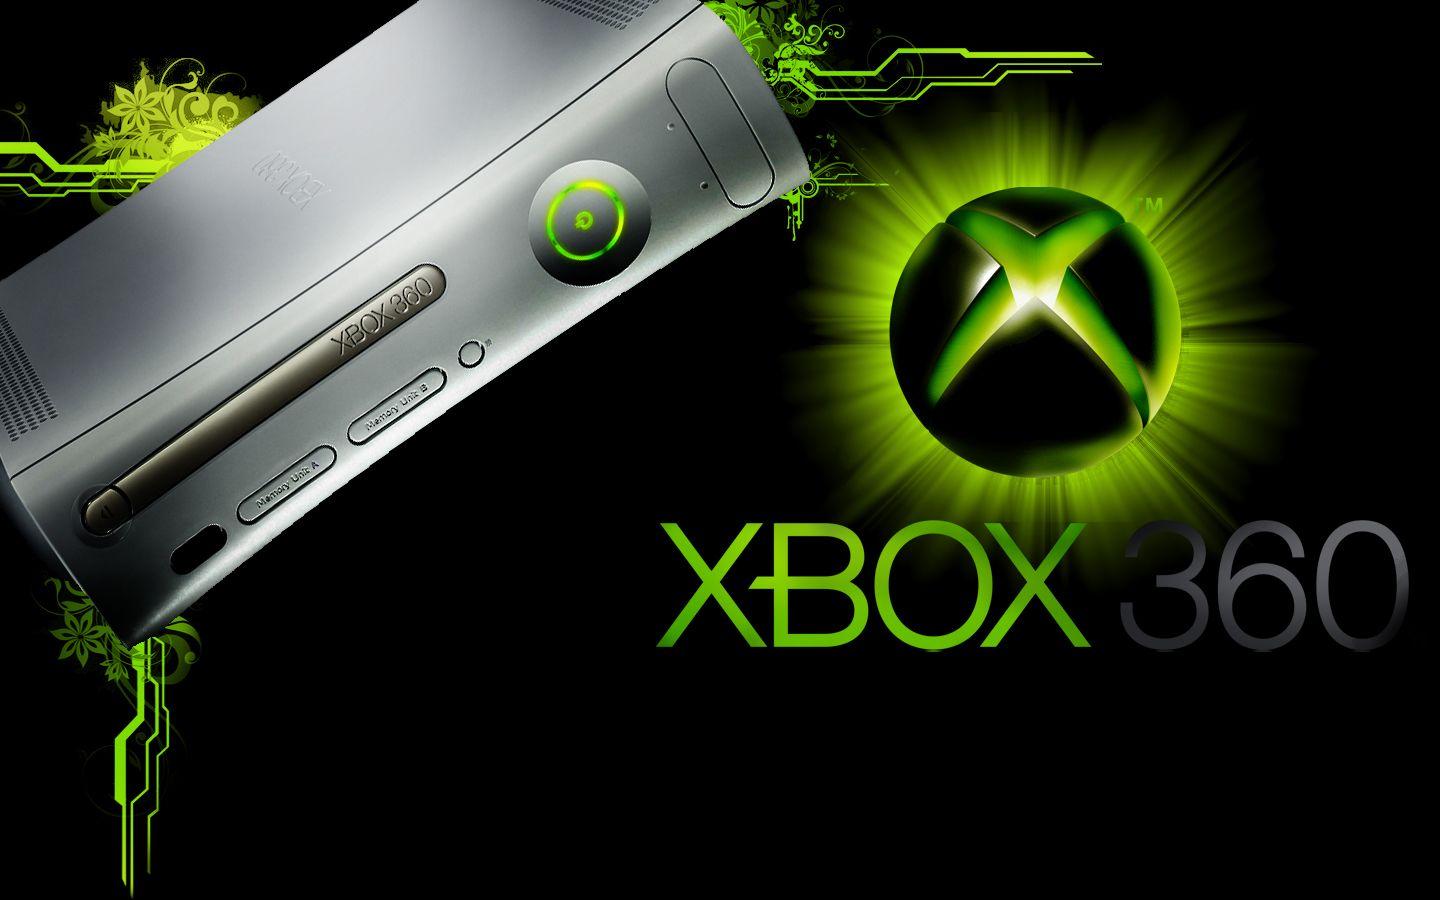 Xbox Live Wallpapers